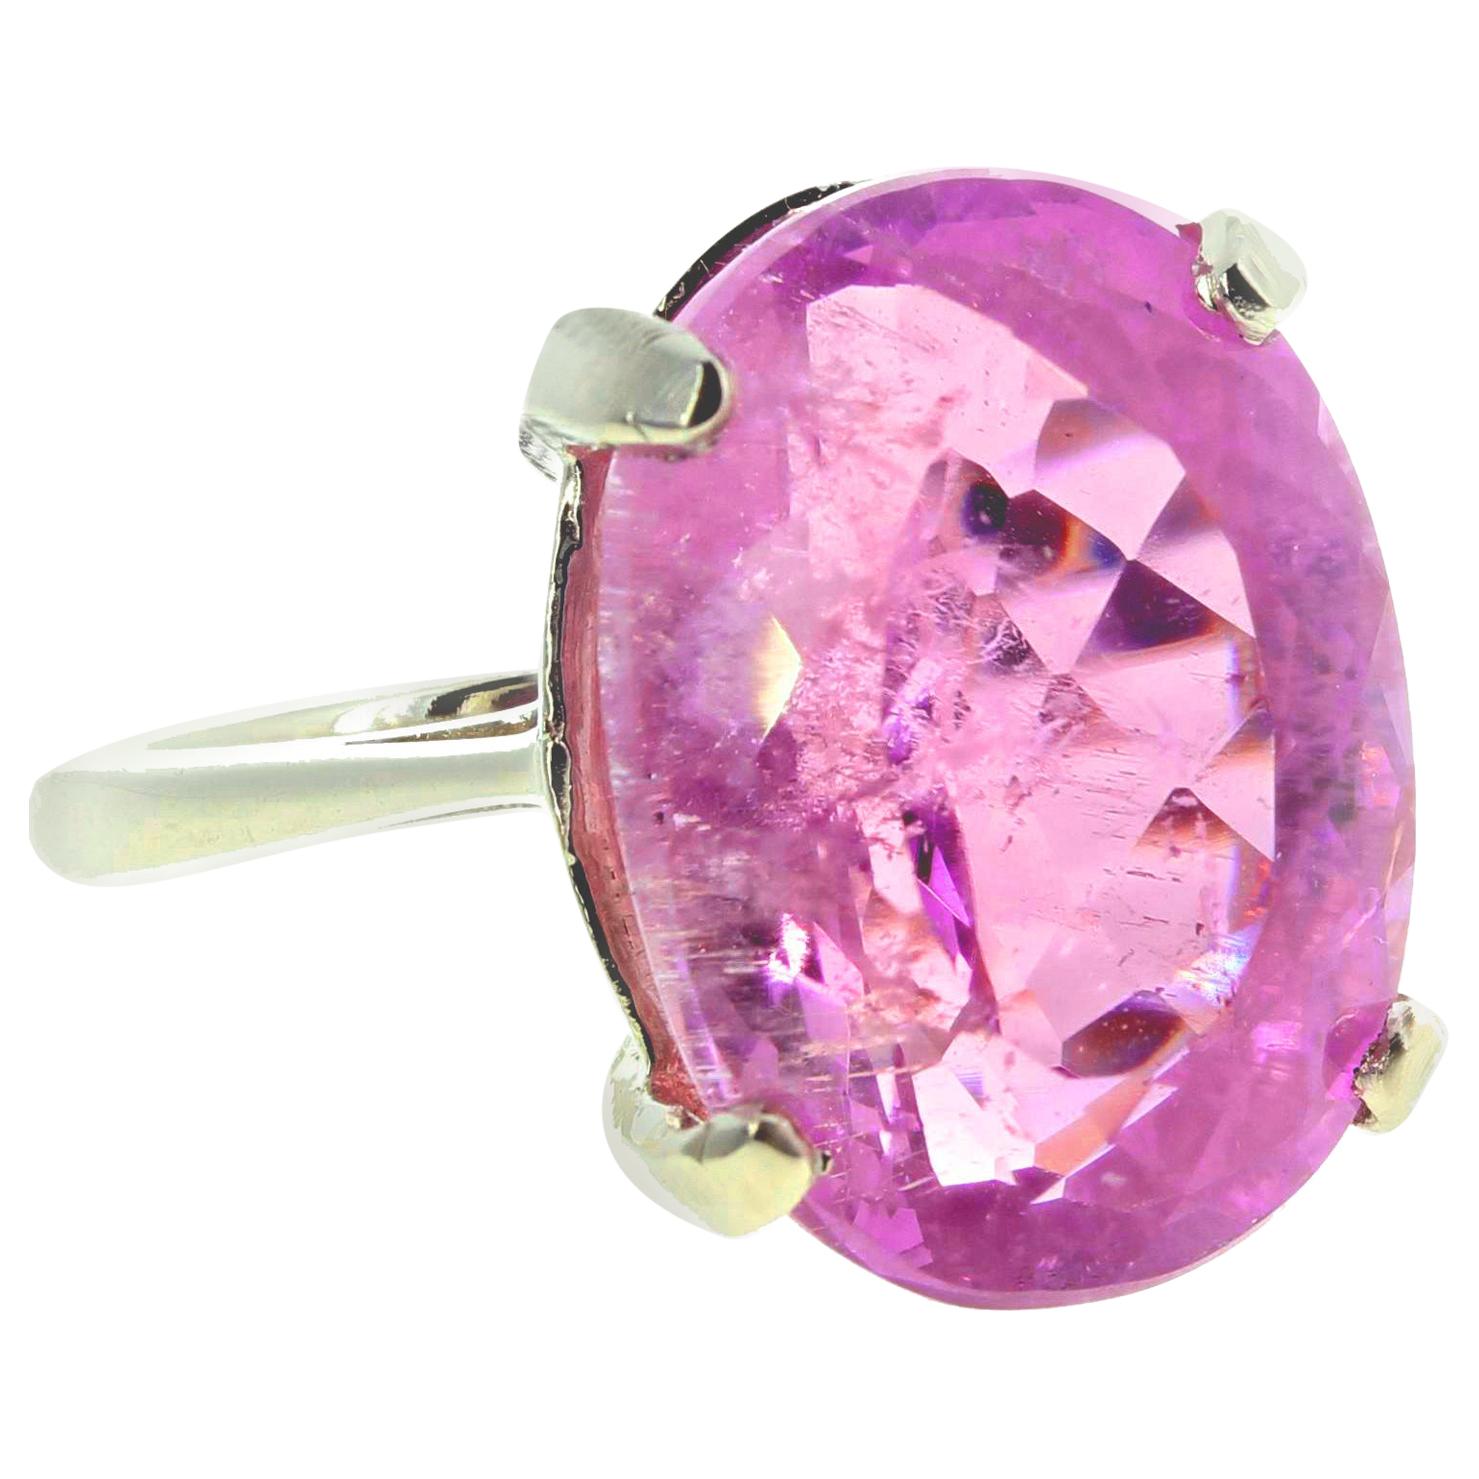 AJD Extraordinarily Rare Clear 14.16Ct PinkyPurple Sparkling Kunzite Silver Ring For Sale